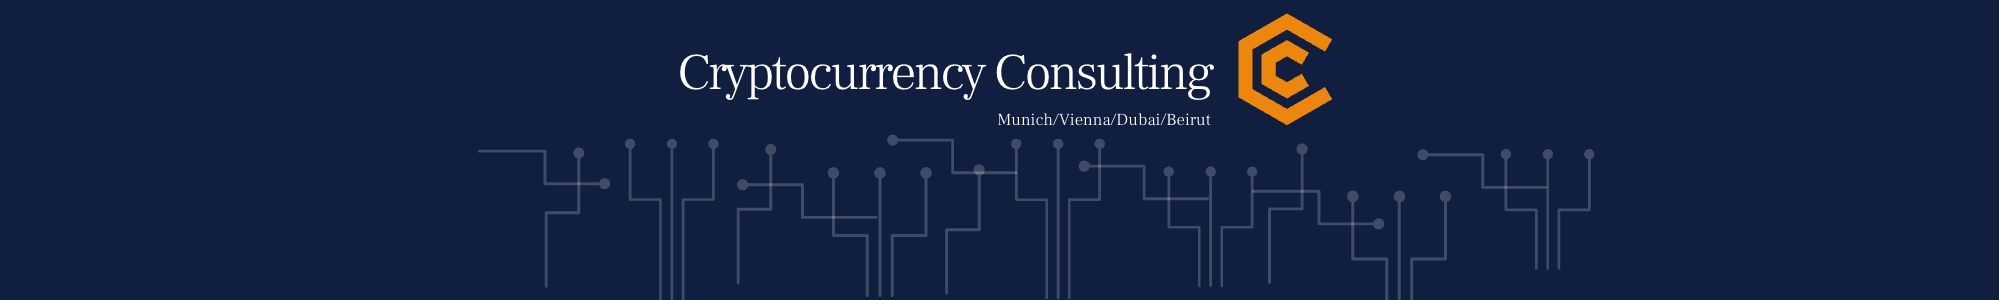 Cryptocurrencyconsulting バナー